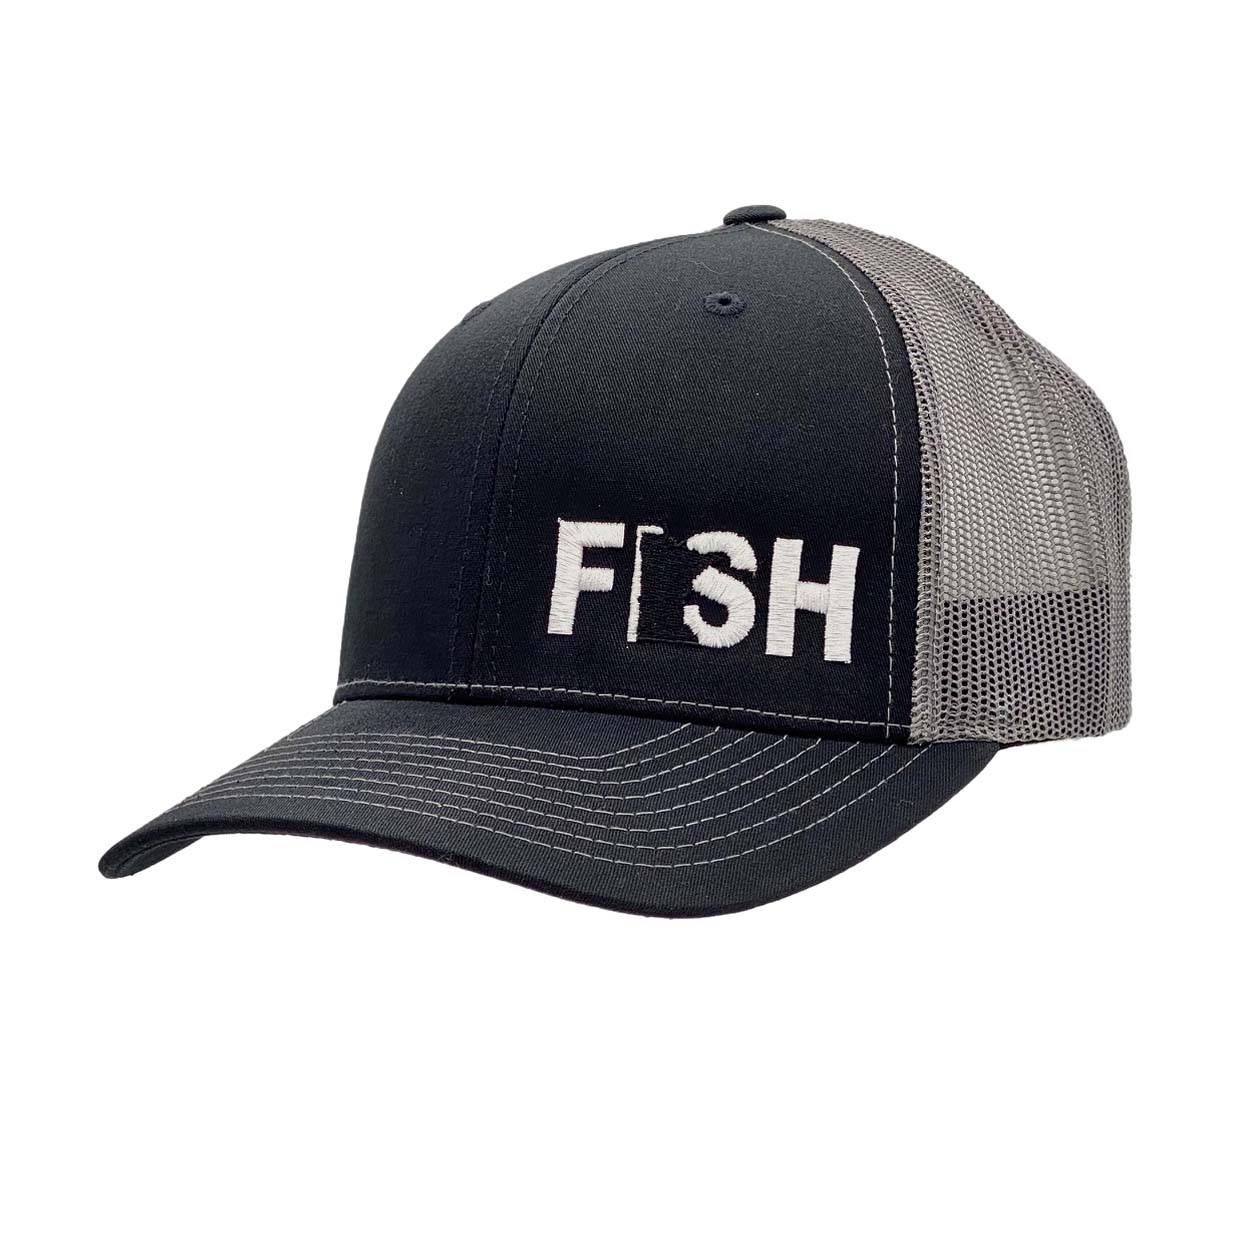 Fish Minnesota Night Out Embroidered Snapback Trucker Hat Black/Gray